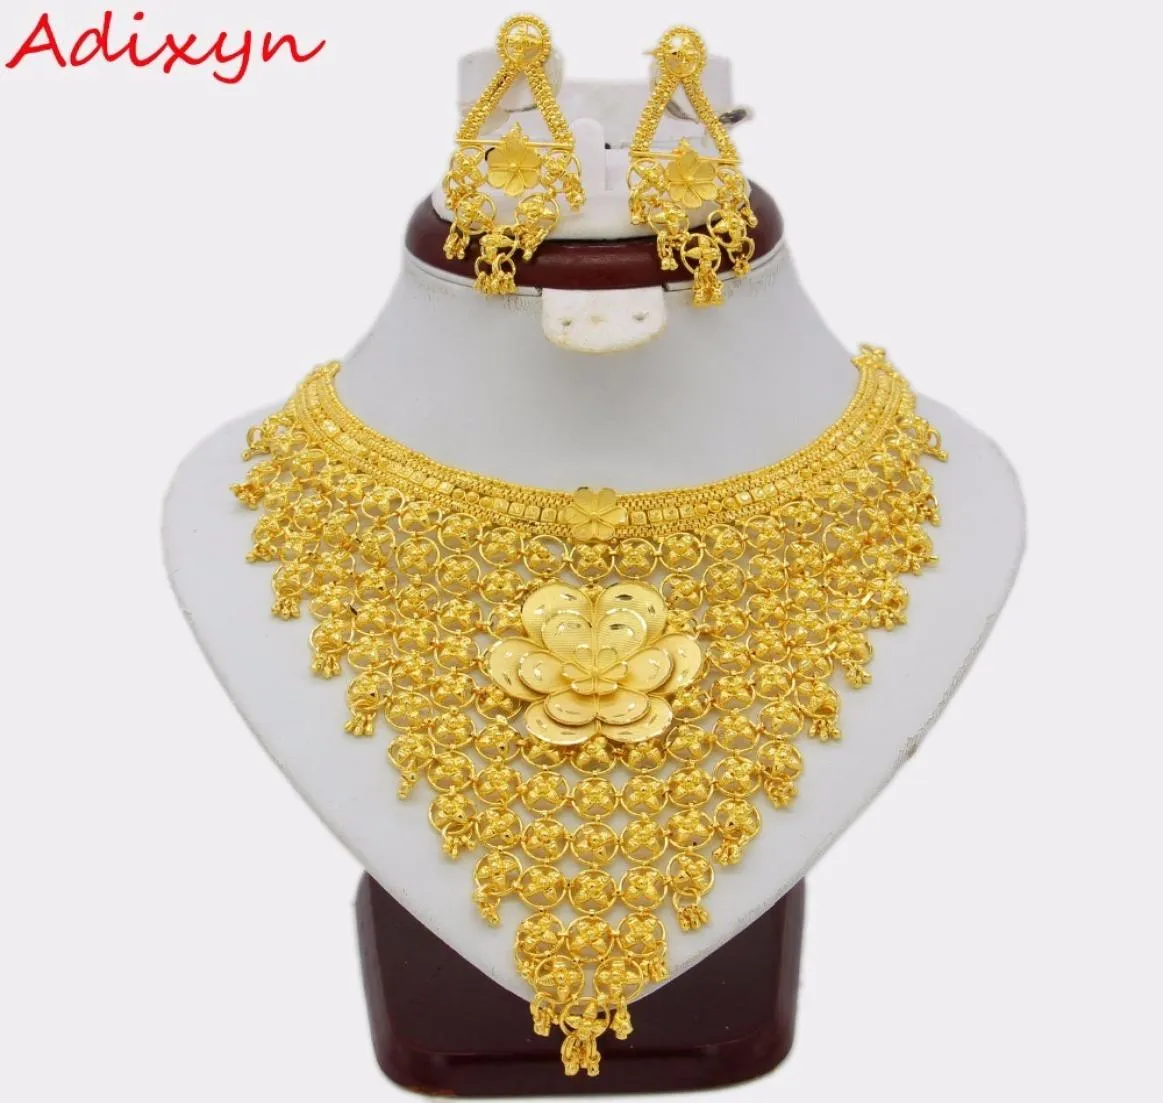 Adixyn Big Flowers NecklaceEarrings Jewelry for Women for Gold ColorCopper Ethiopian Arabic India Wedding Gifts C181227016513393